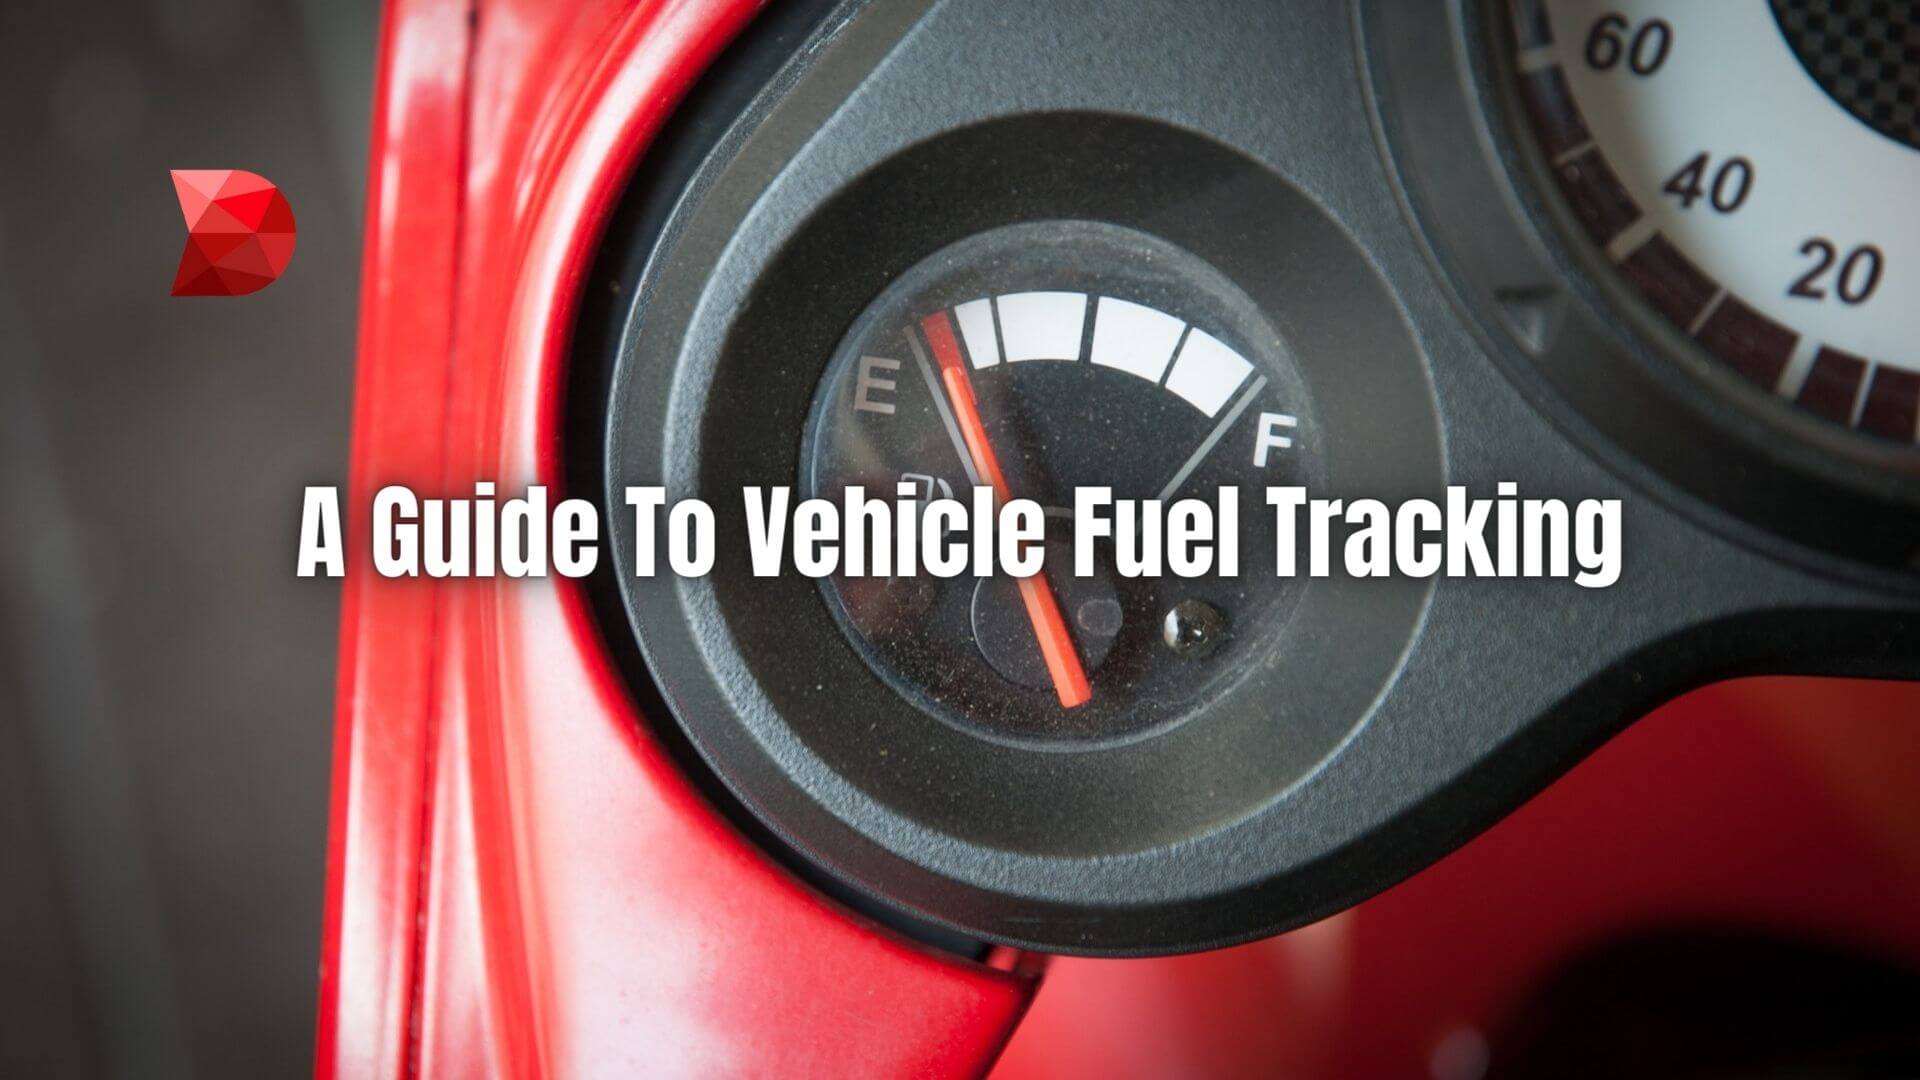 Are you looking for a way to track vehicle fuel consumption more effectively? A fuel management system is the answer, Here's how it works.